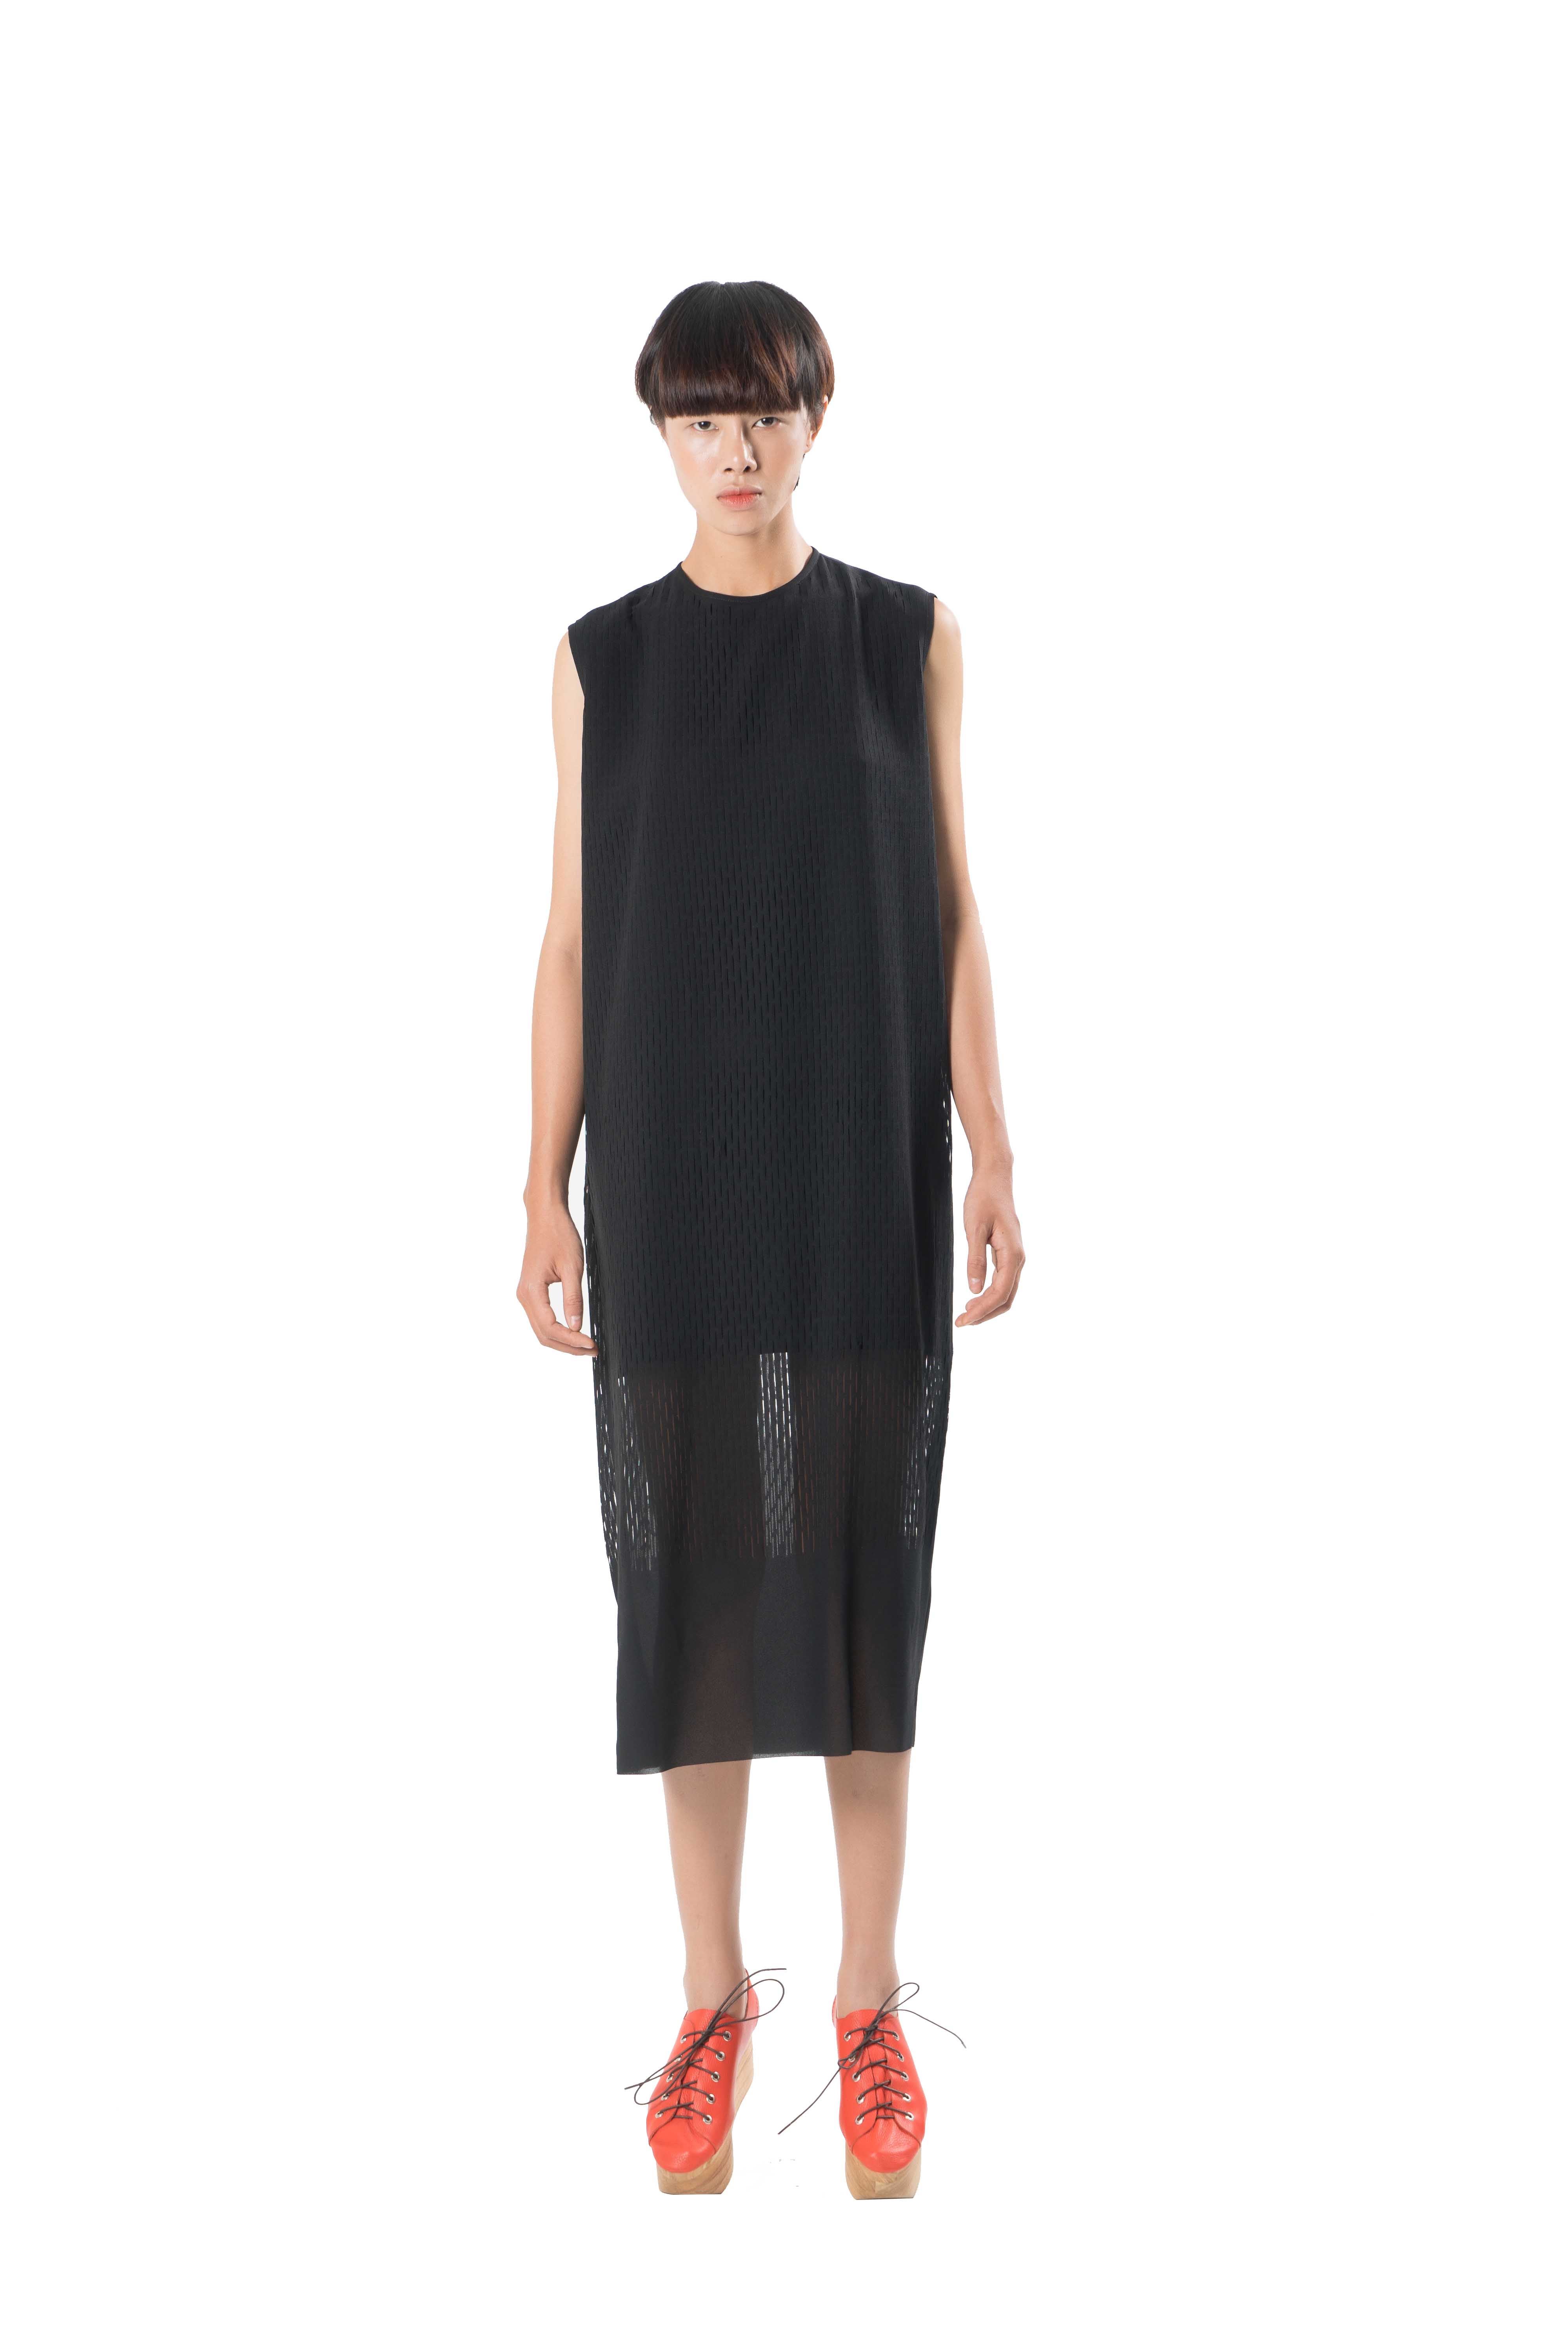 Black sleeveless loose fit laser detailing dress with lining.